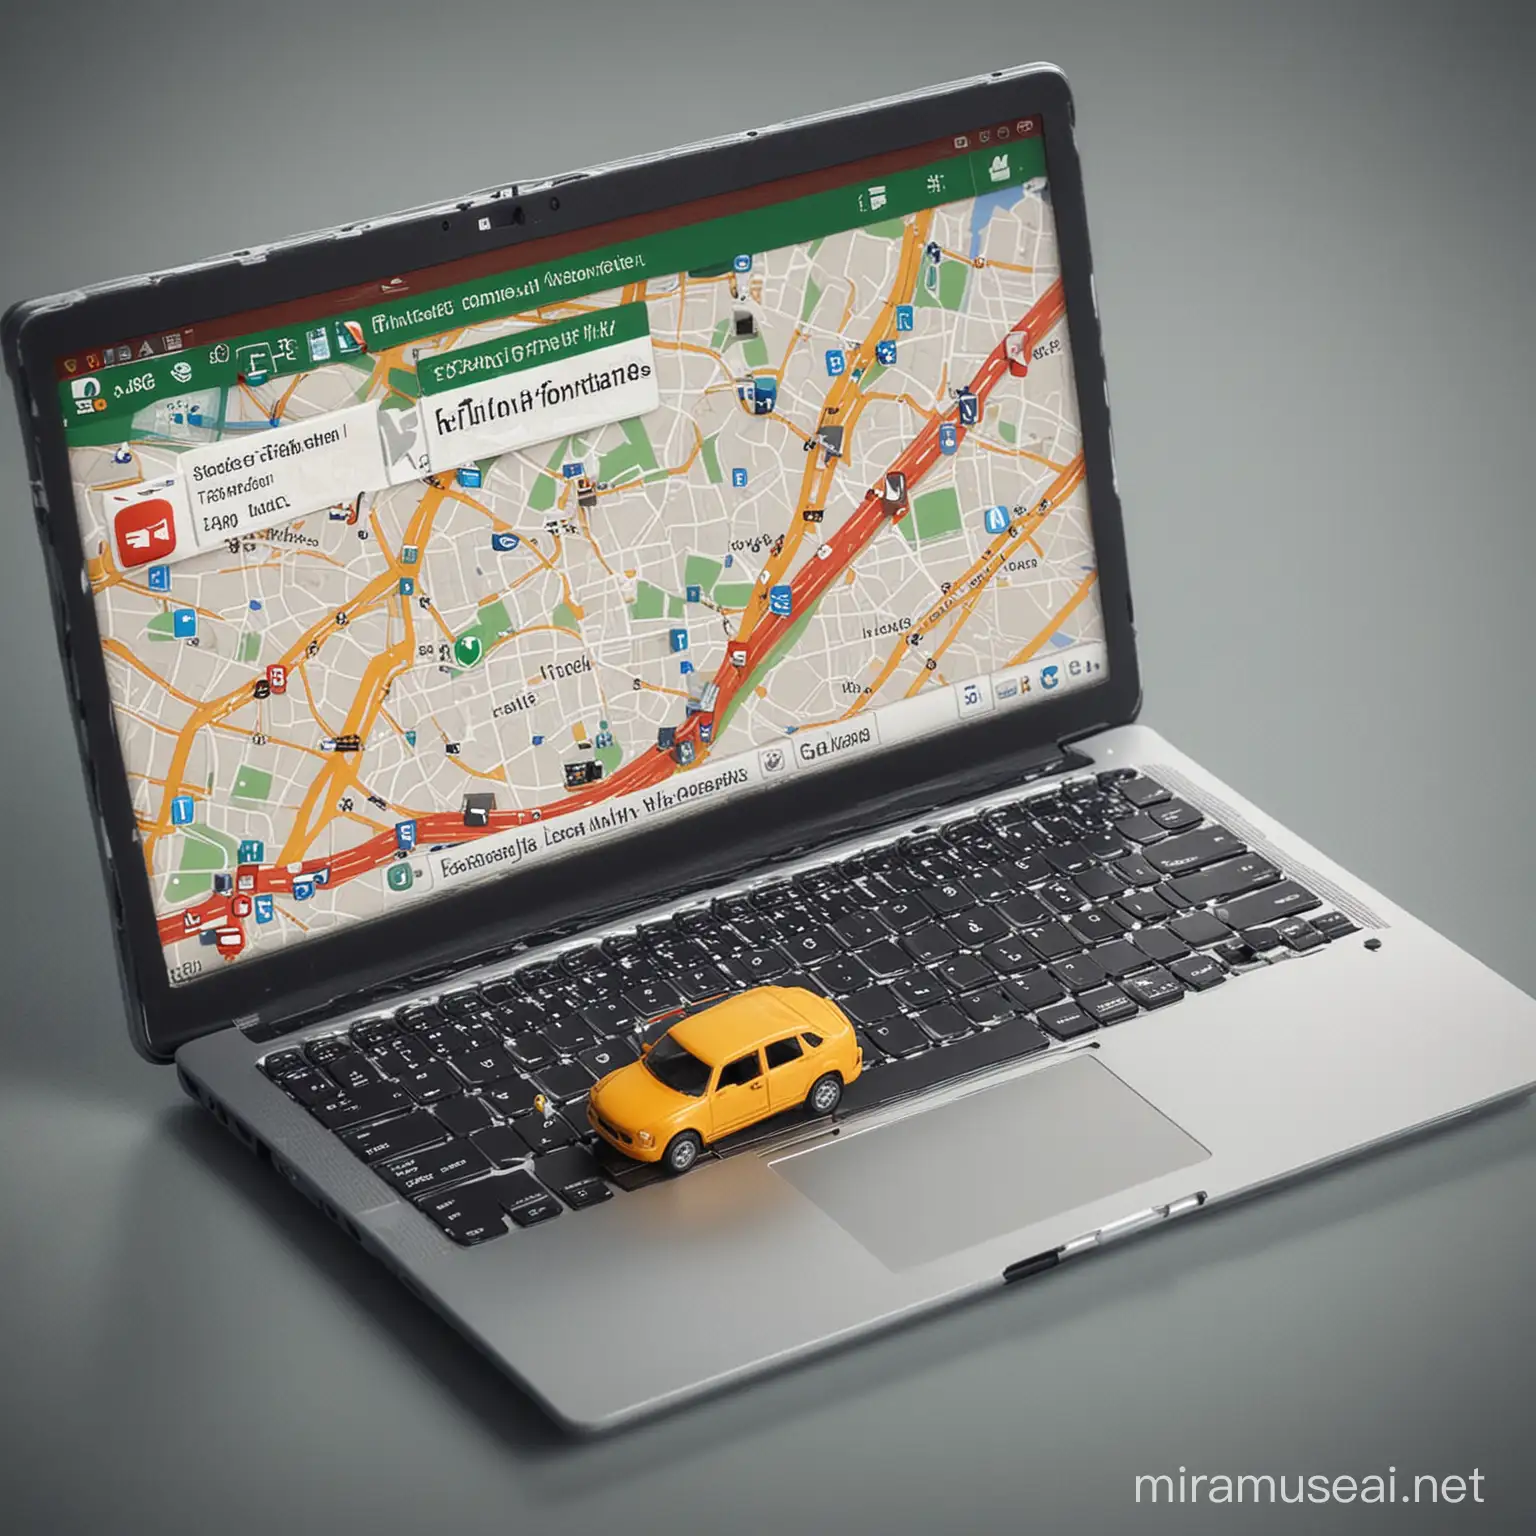 laptop whit trafic informations